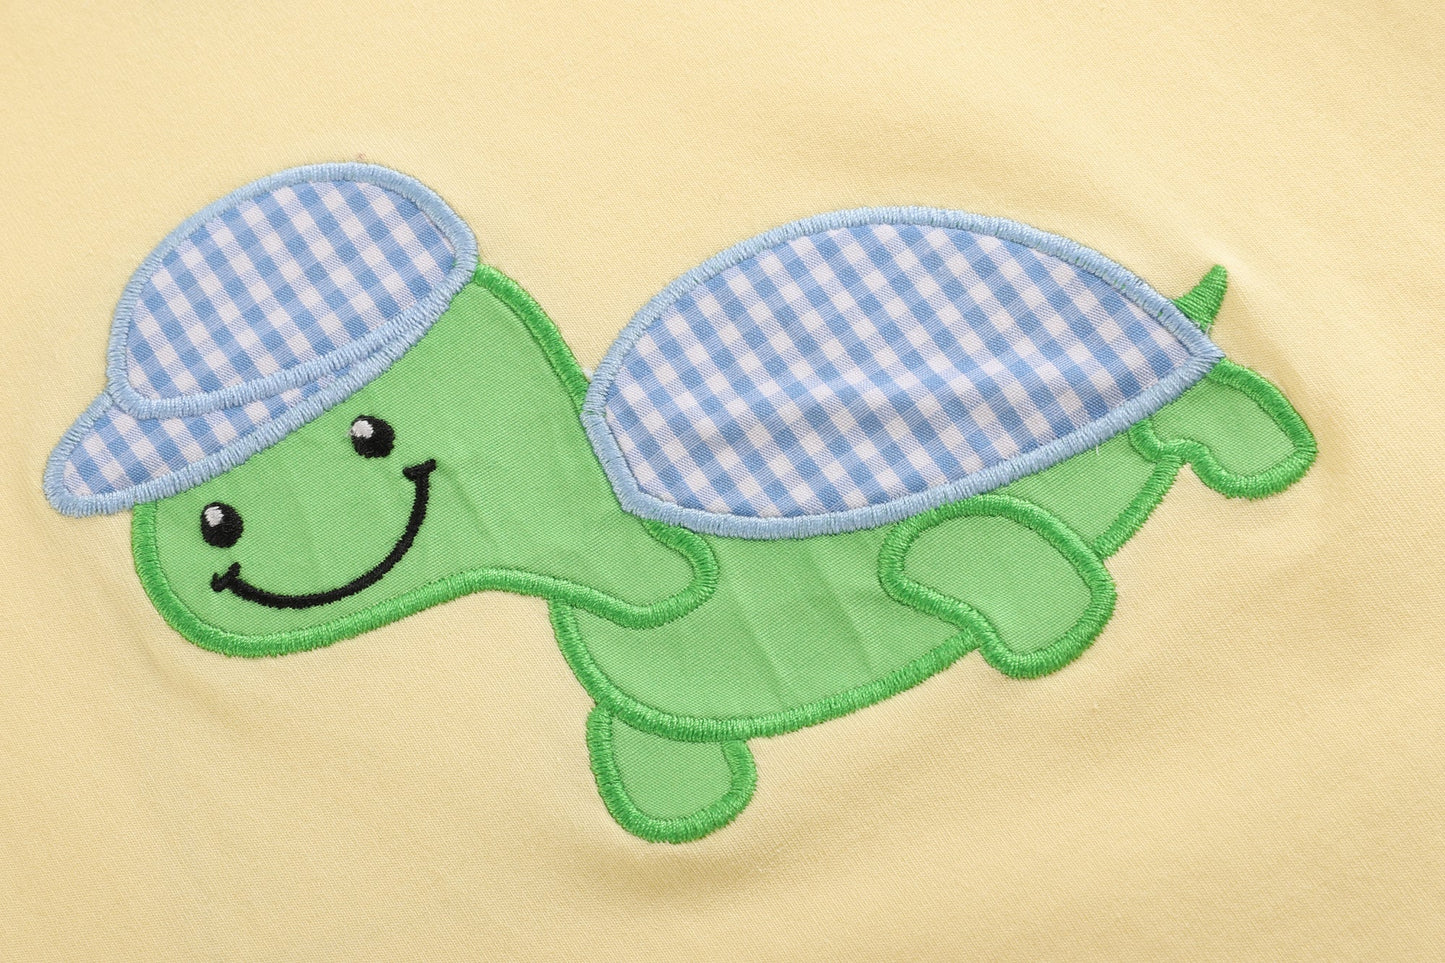 Yellow Turtle Shirt and Blue Gingham Shorts Set